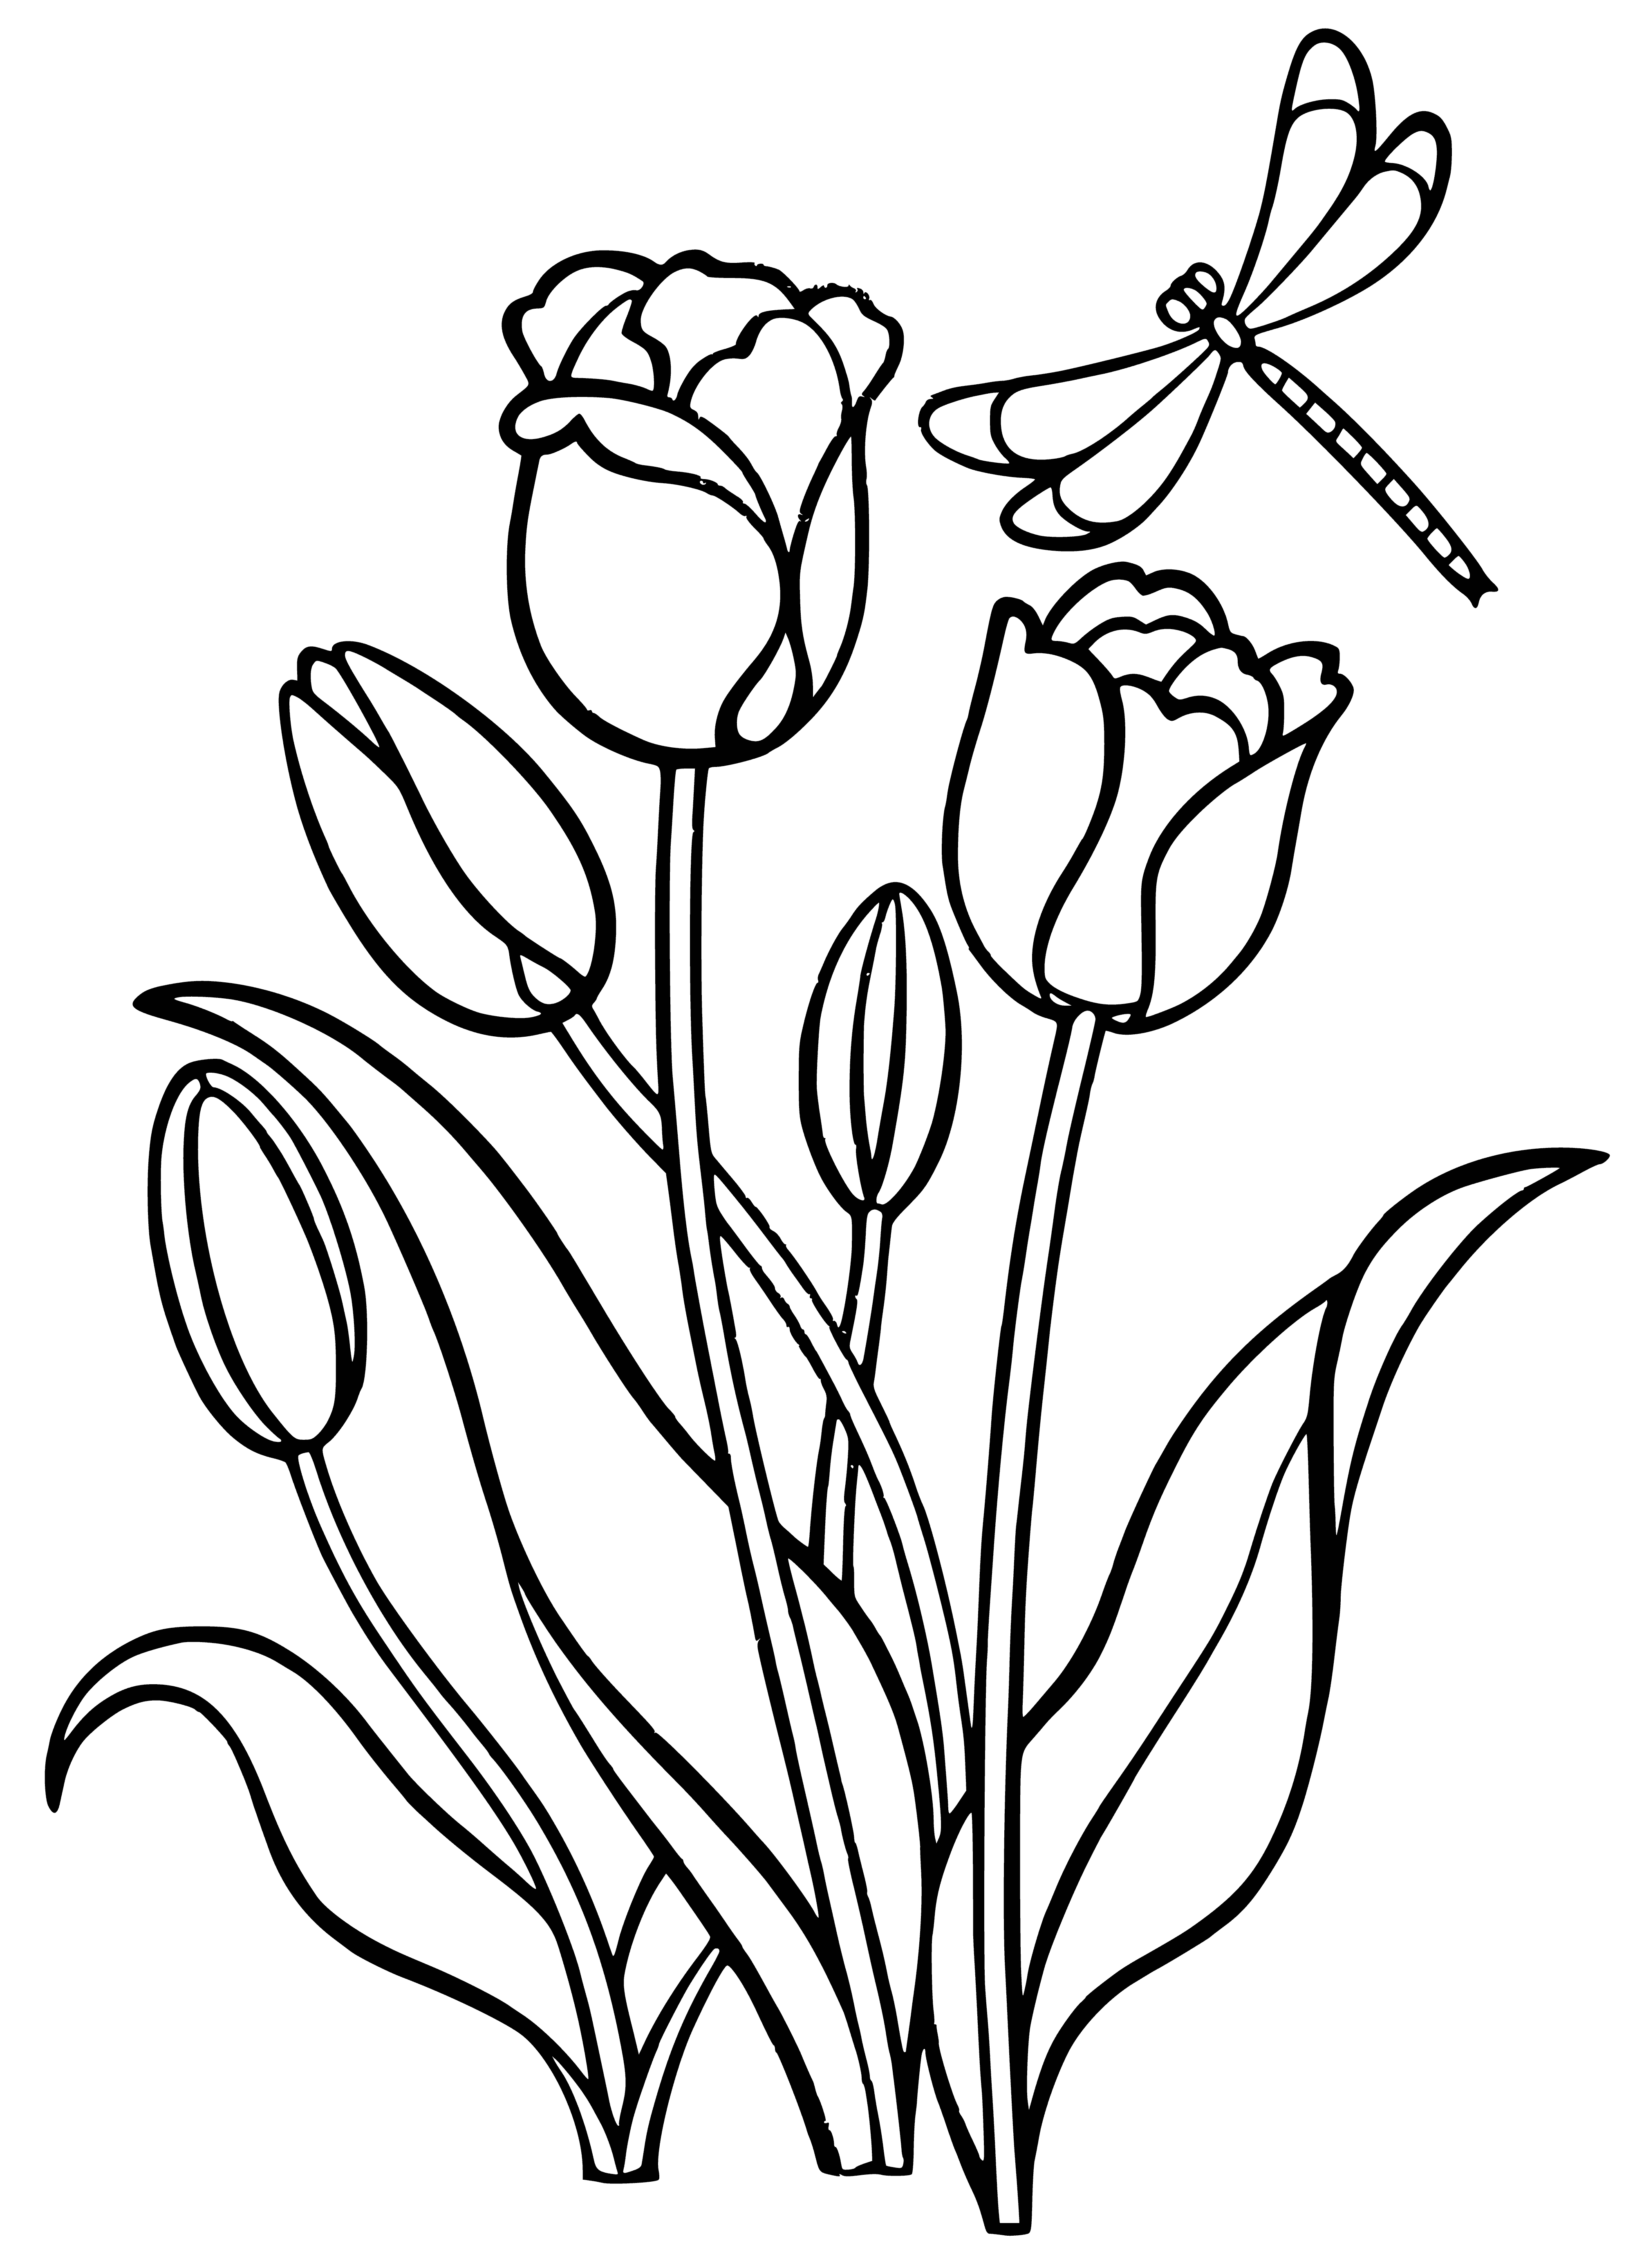 coloring page: 7 tulips (3 pink, 2 yellow, 2 purple) in a vase on a table in a room with a window.